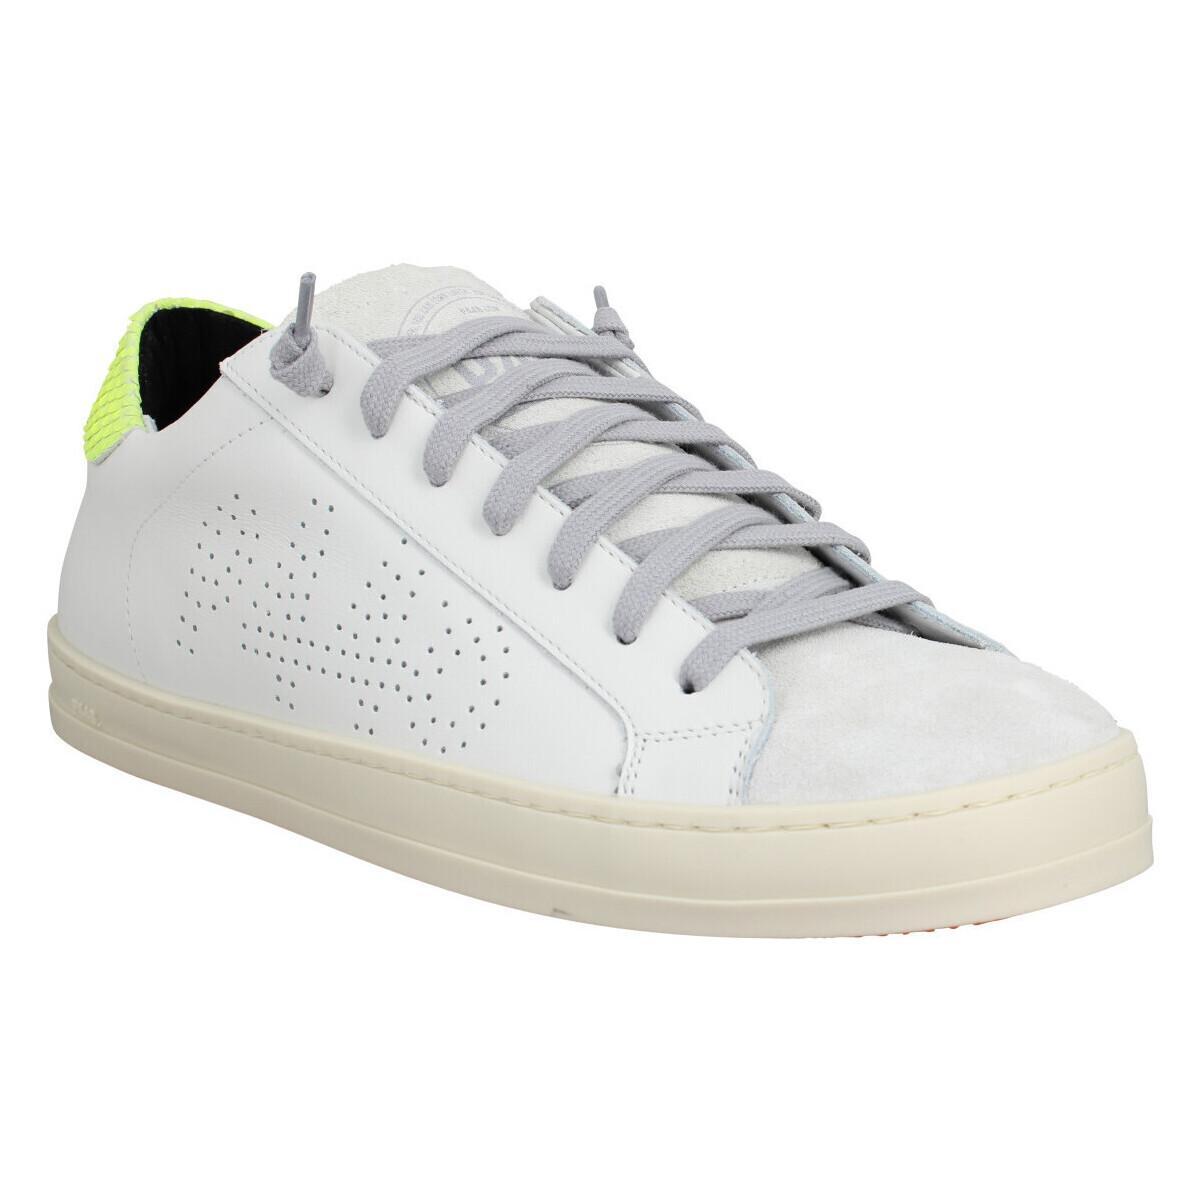 Chaussures Homme Baskets mode P448 John Cuir Homme White Neon Blanc